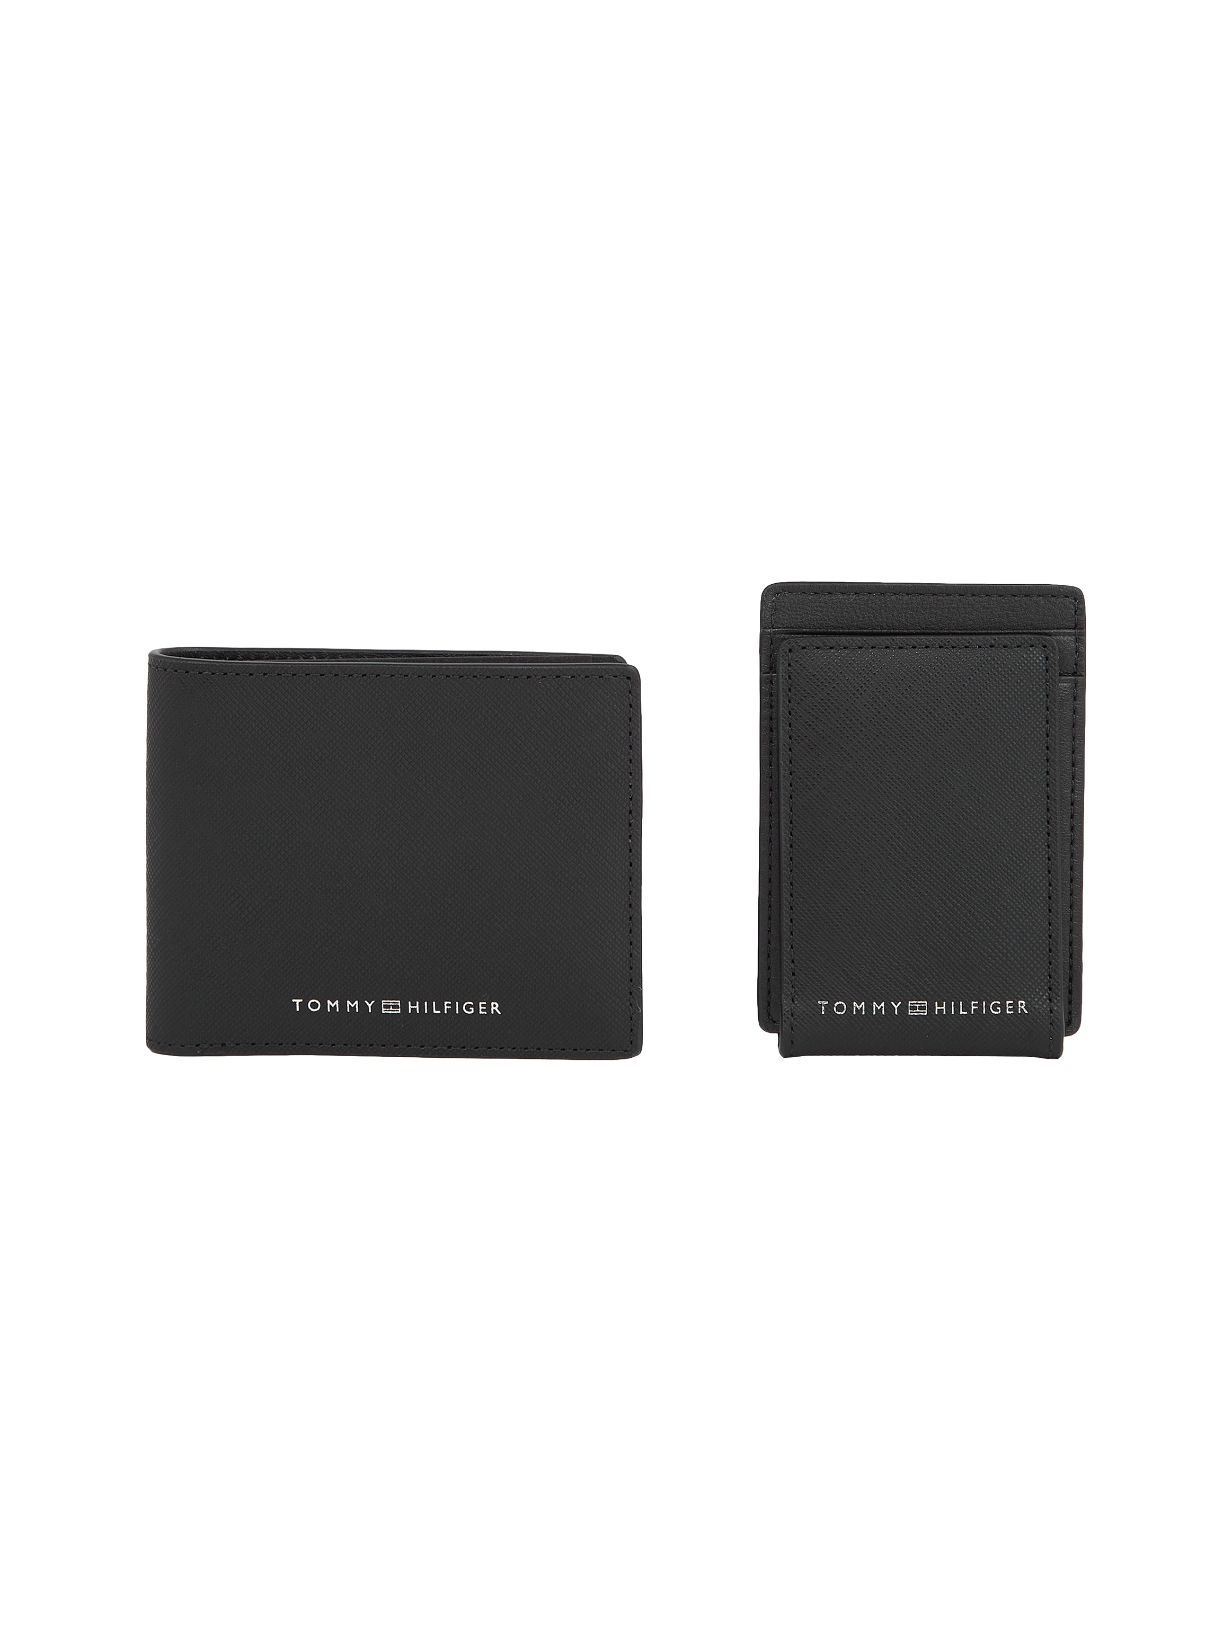 Tommy Hilfiger Leather Credit Card and Small Wallet Gift Set